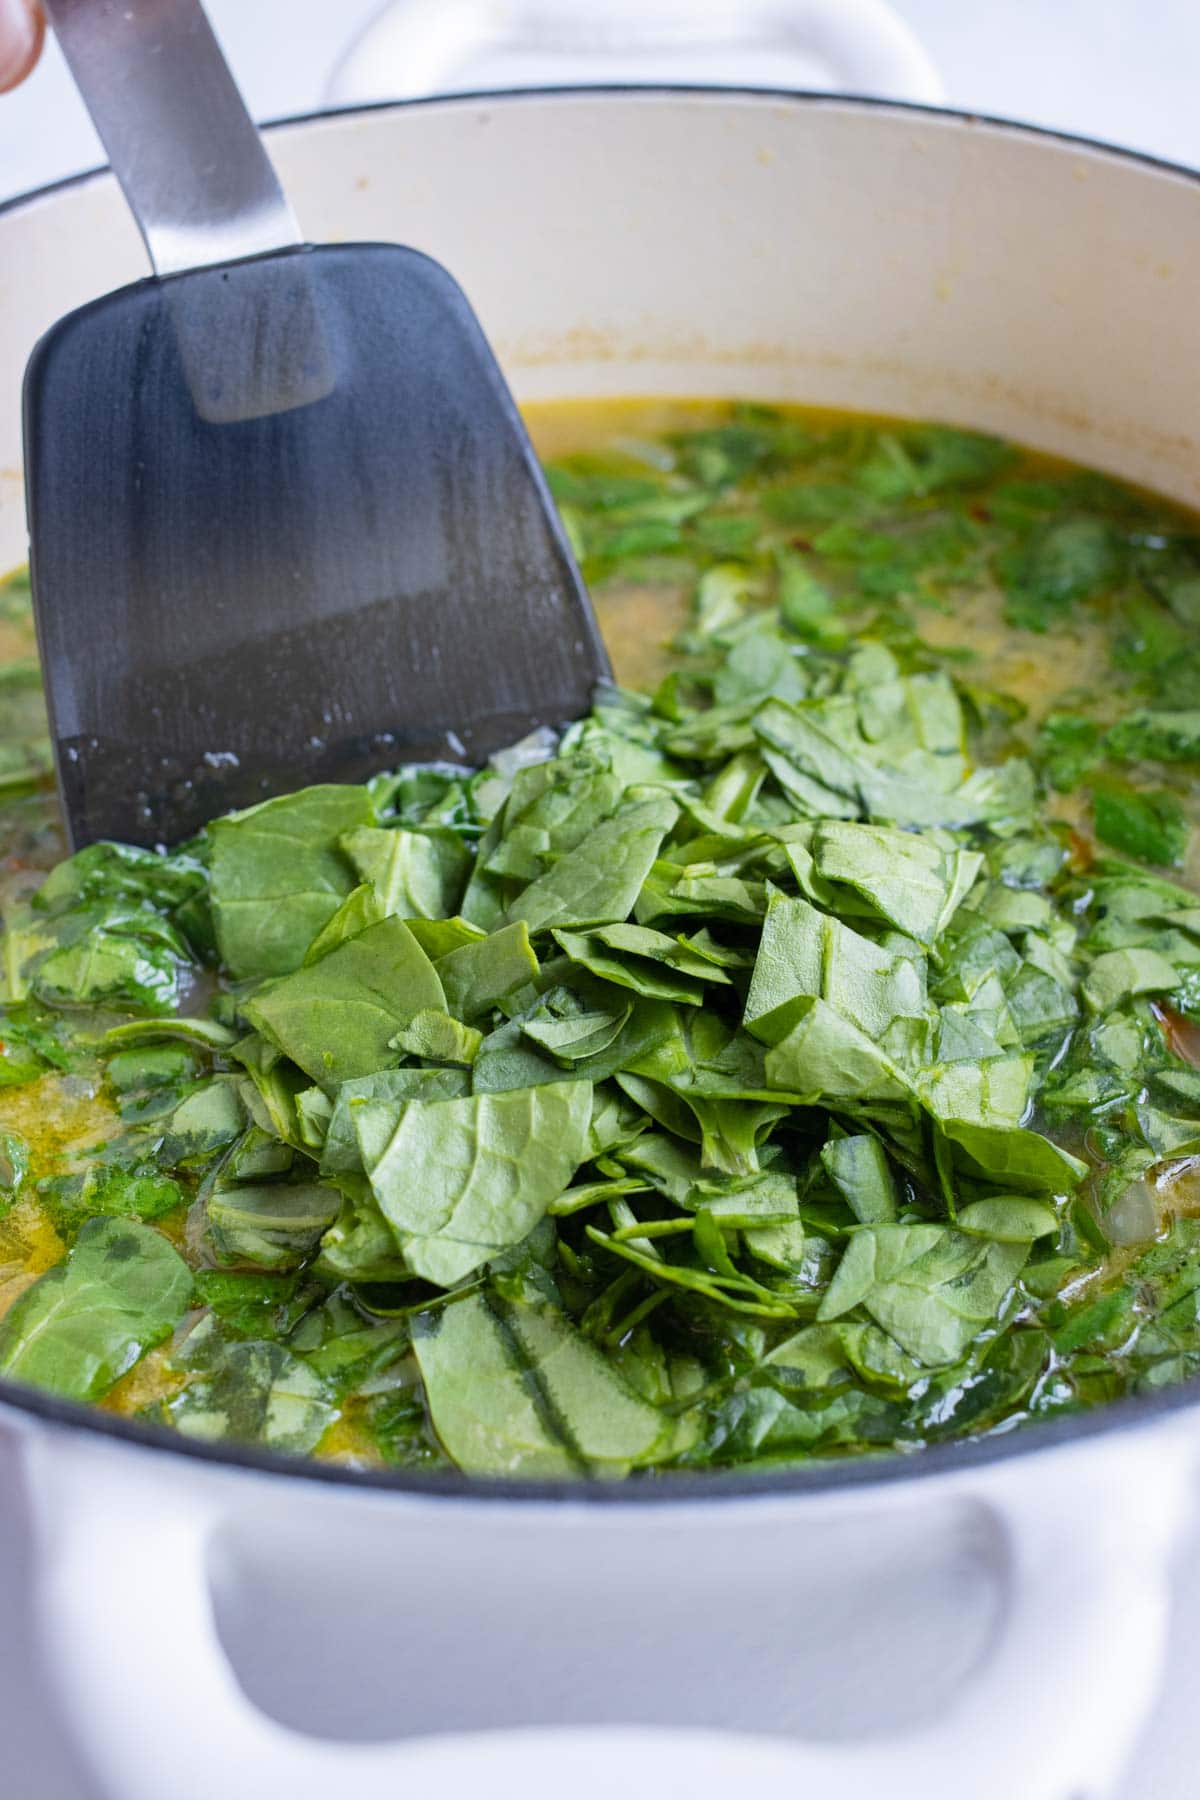 Chopped spinach is added to the Italian Wedding Soup.